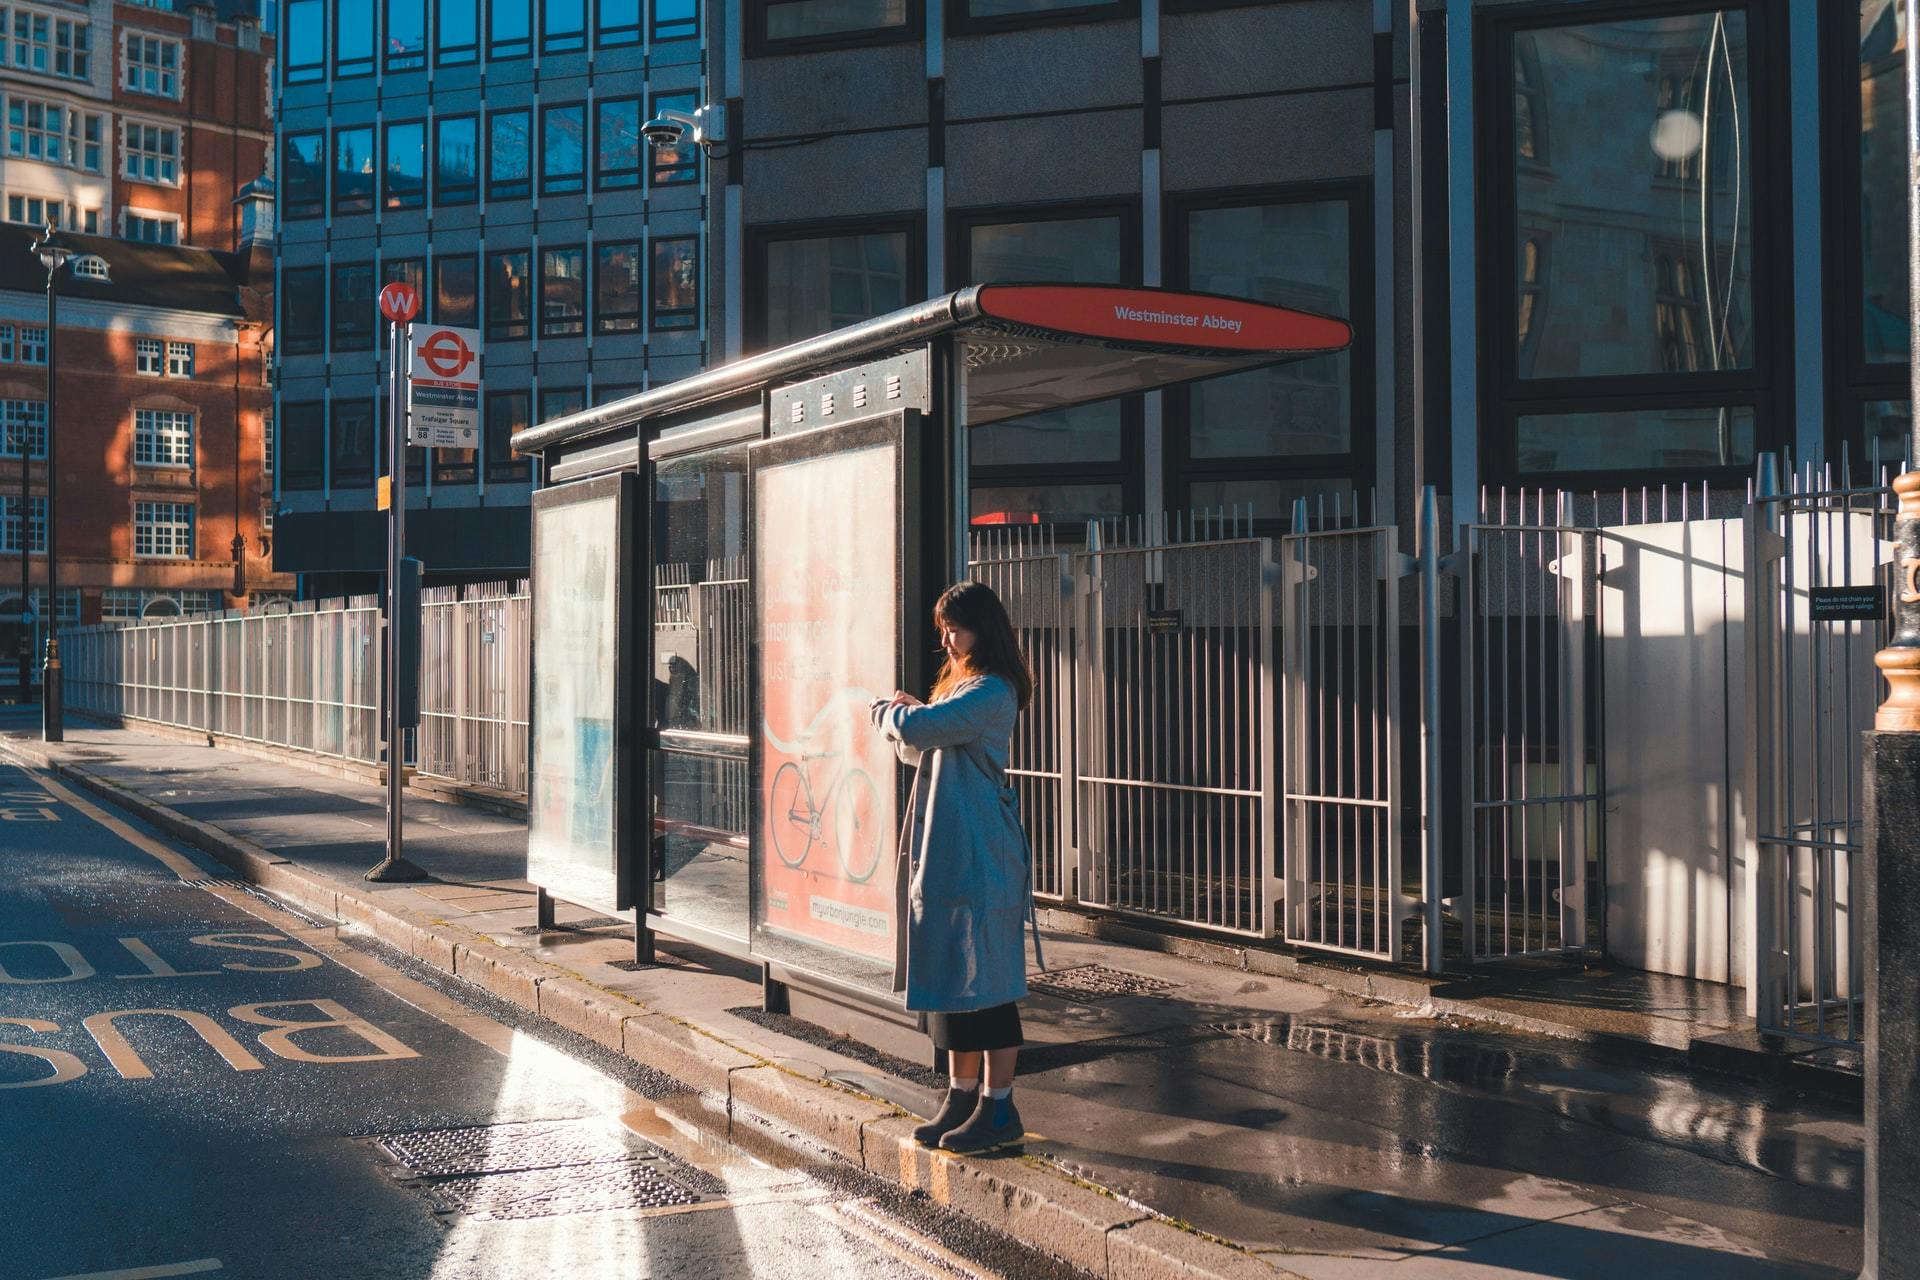 A person standing at a bus stop